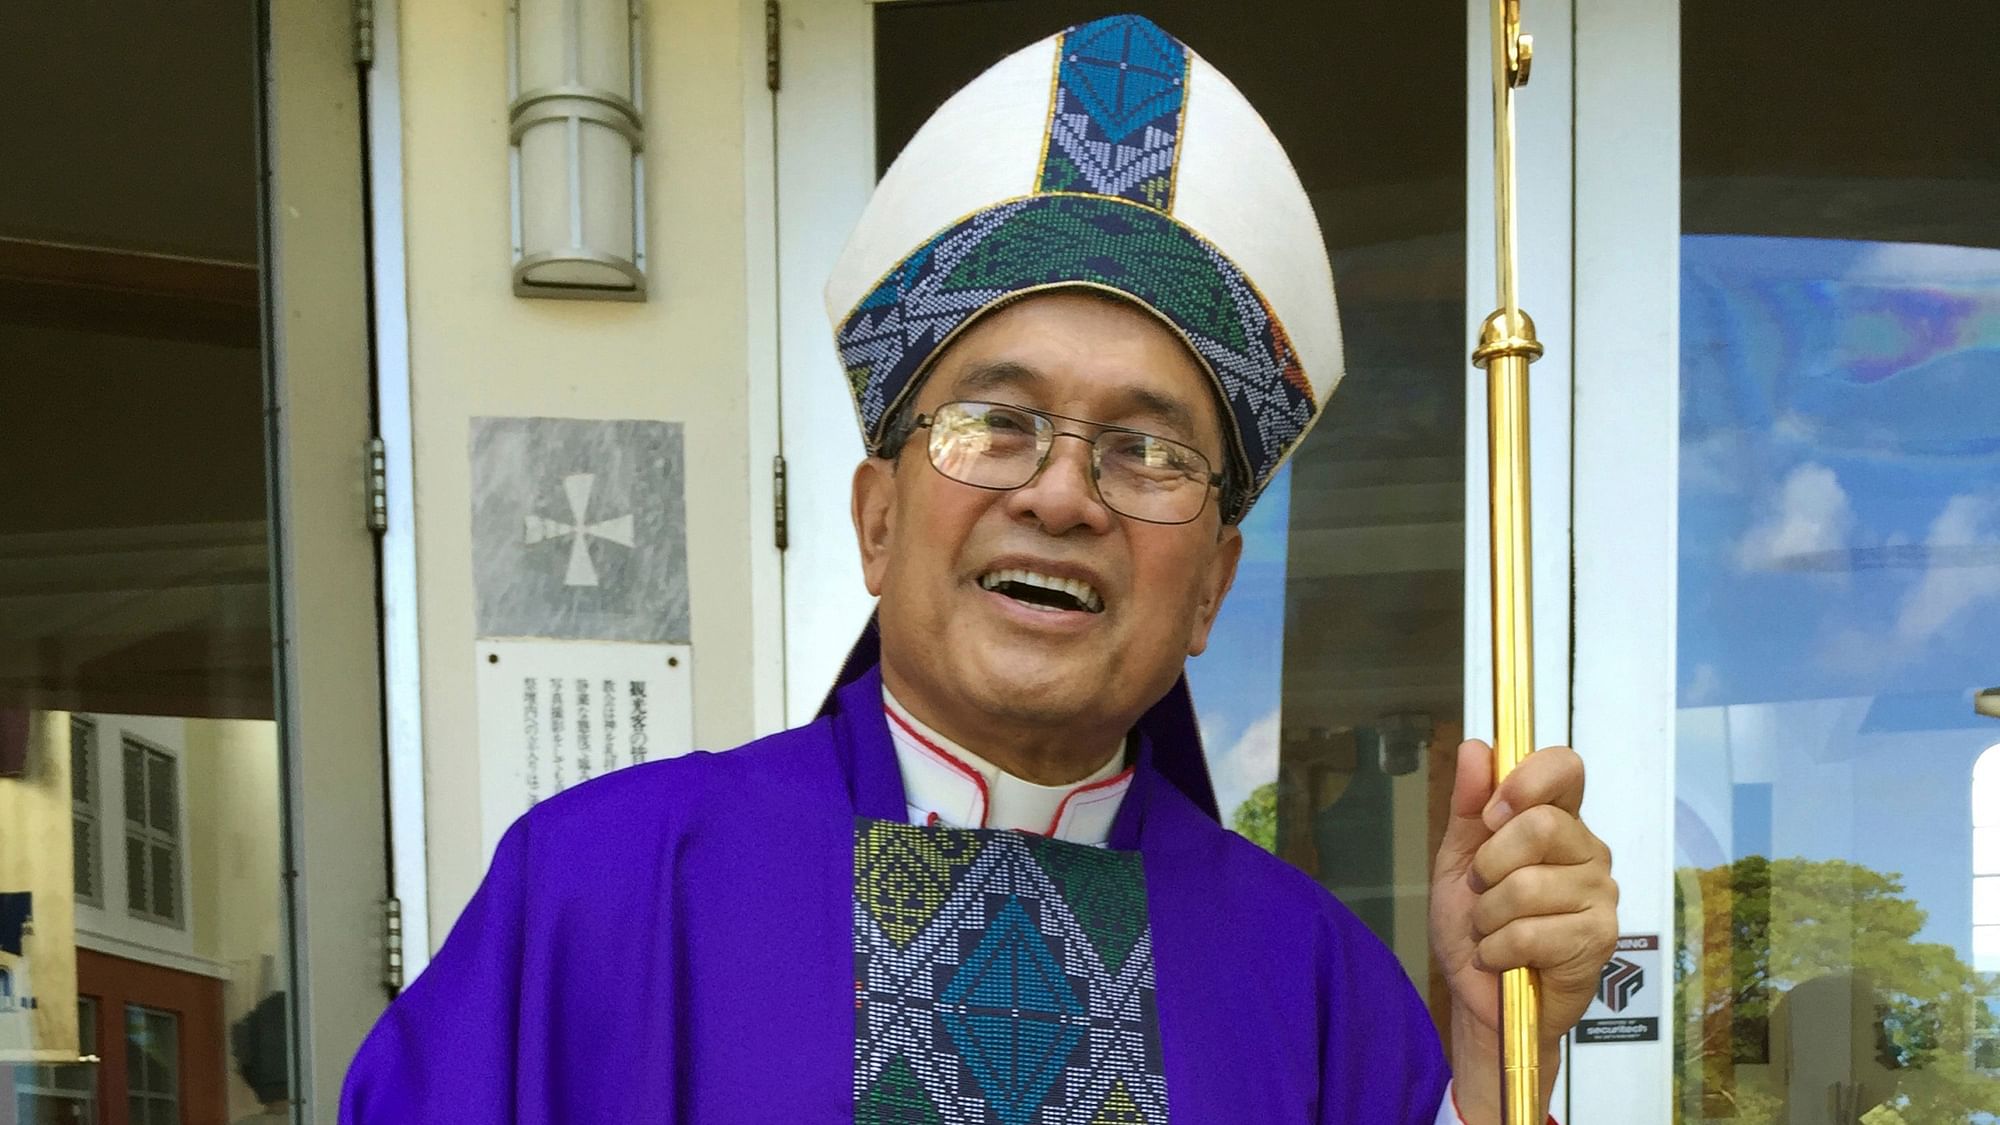 In this 30 November, 2014 file photo, Archbishop Anthony Apuron stands in front of the Dulce Nombre de Maria Cathedral Basilica in Hagatna, Guam.